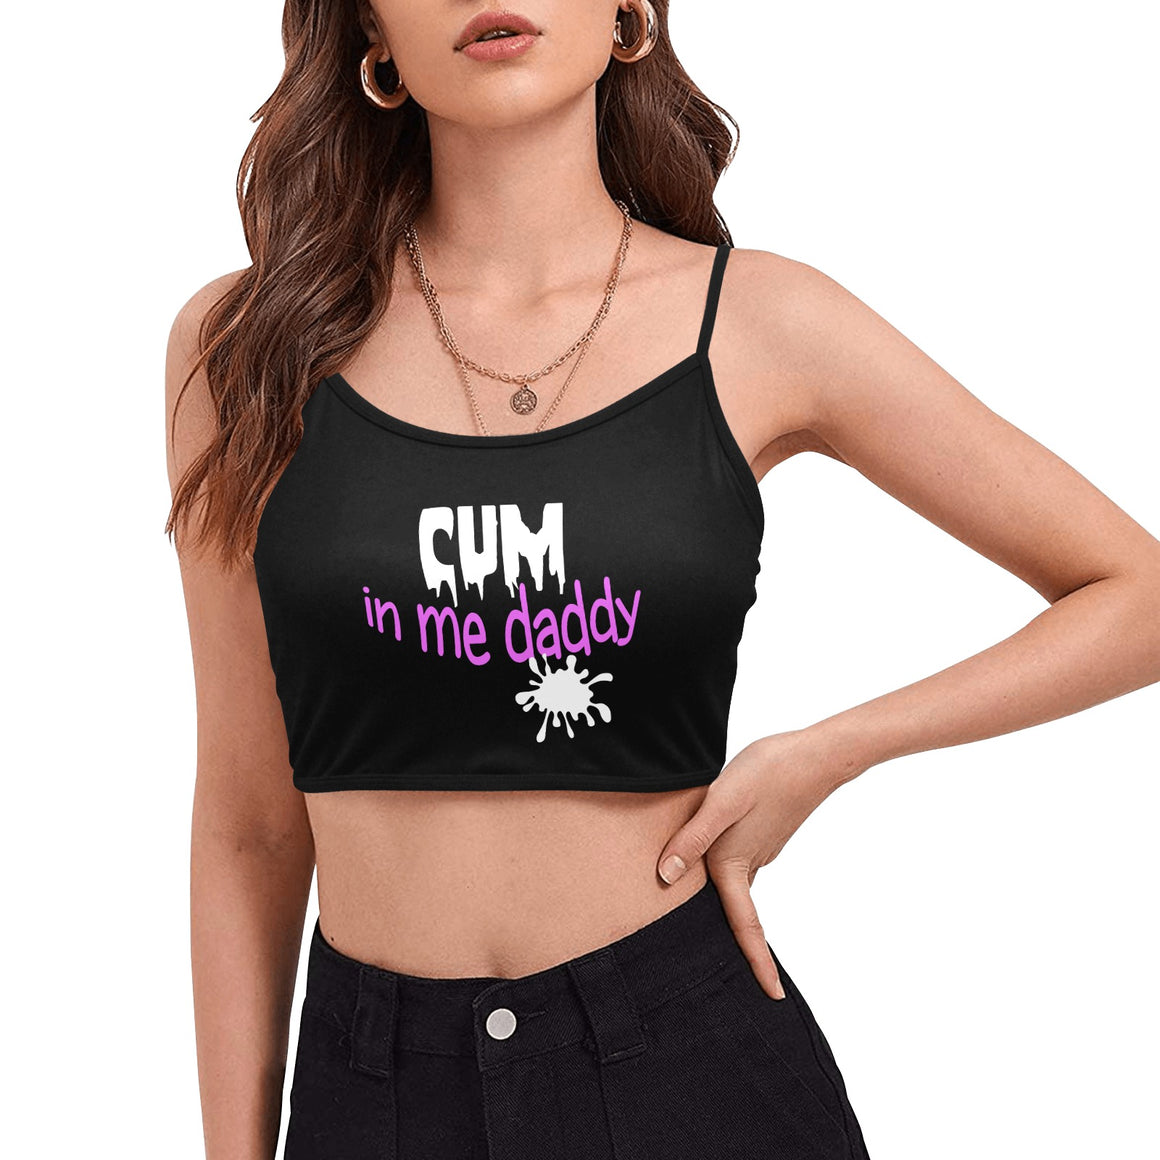 DDLG Crop Top Shirt Cum In Me Daddy Dom Little Girl Age Play Little Space Clothing